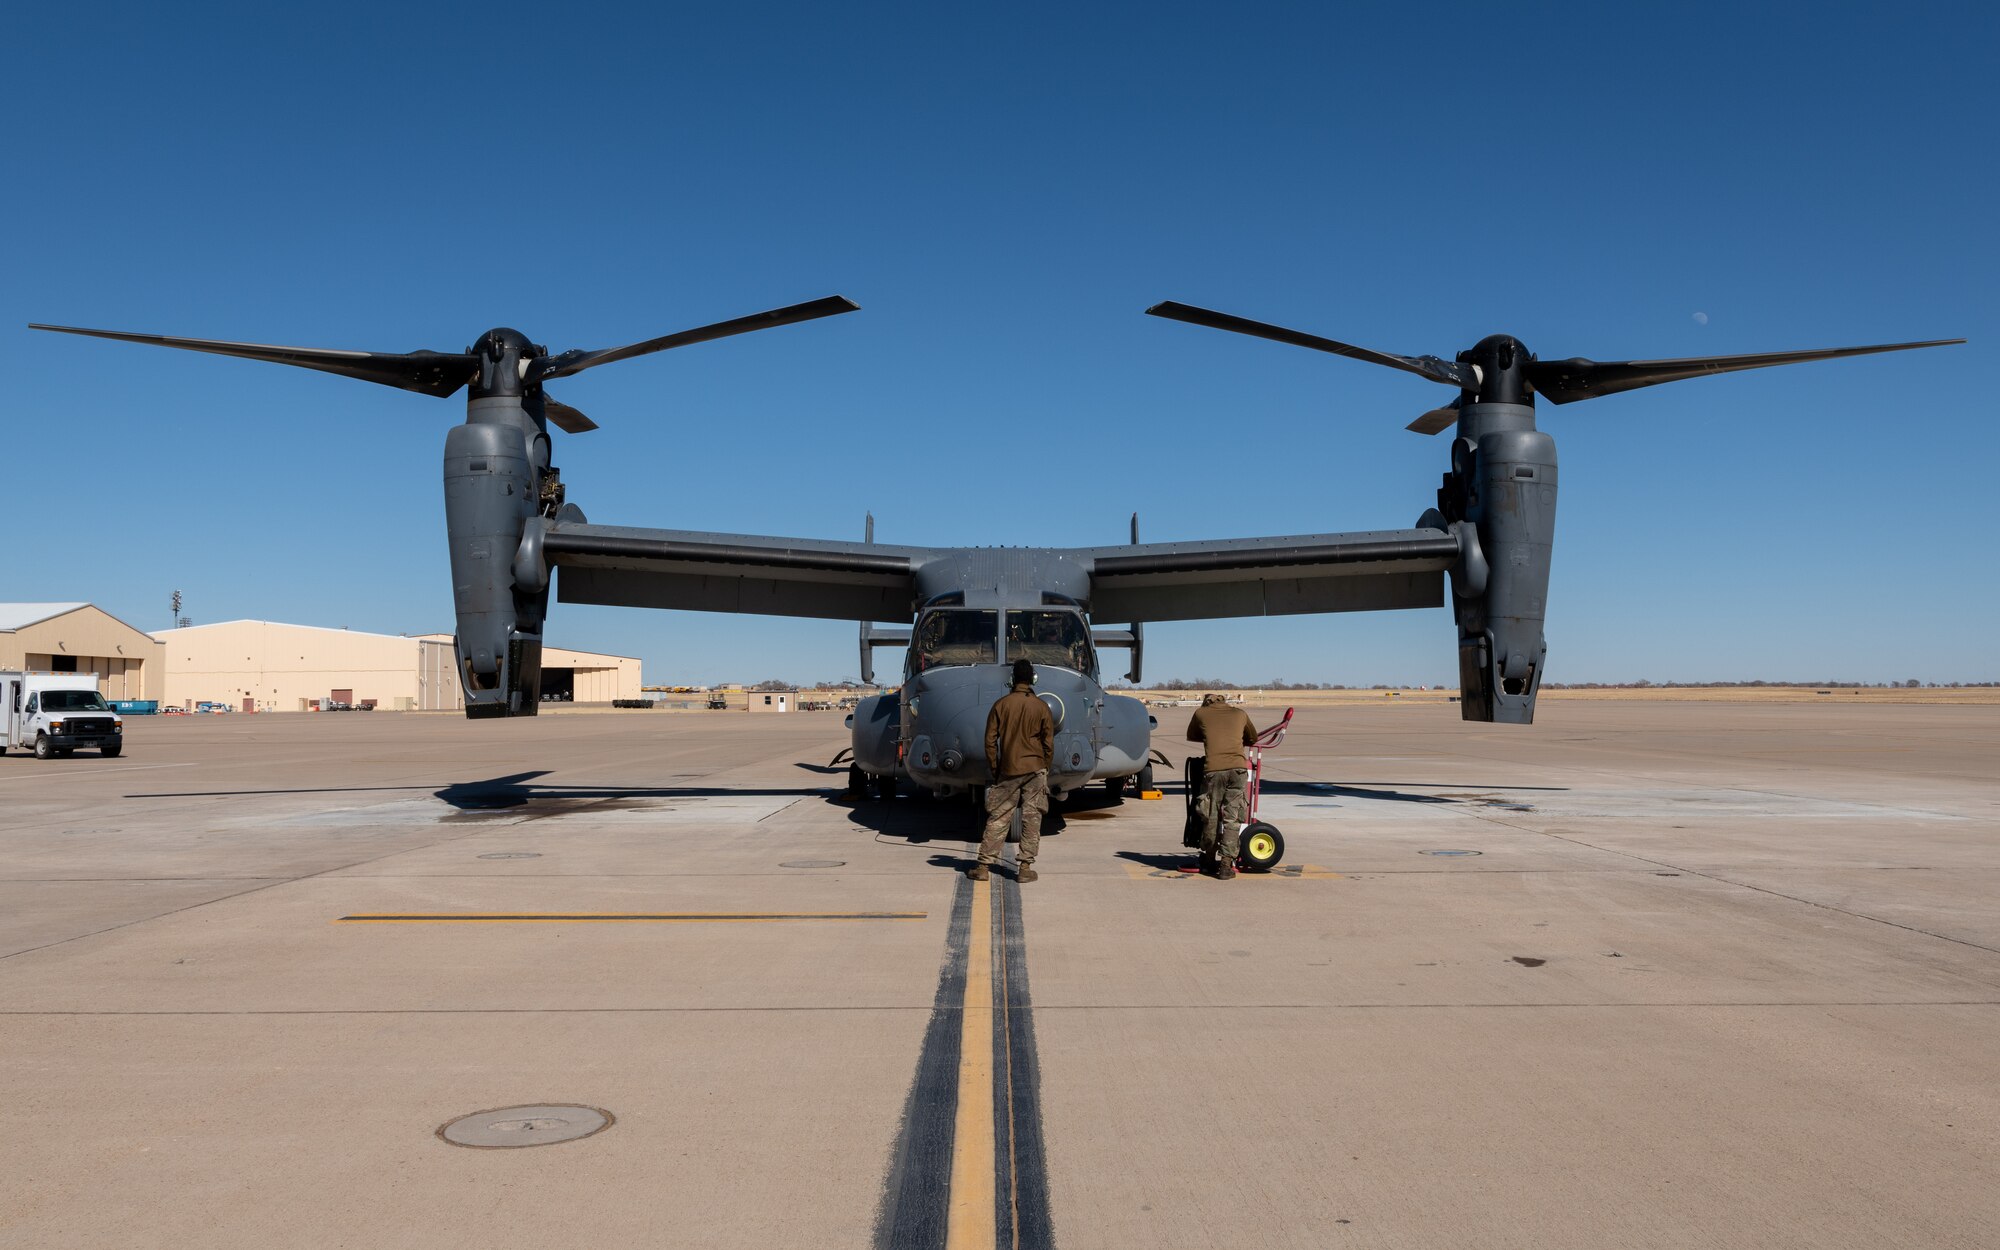 U.S. Air Force Airmen conducts an exercise on the flightline.